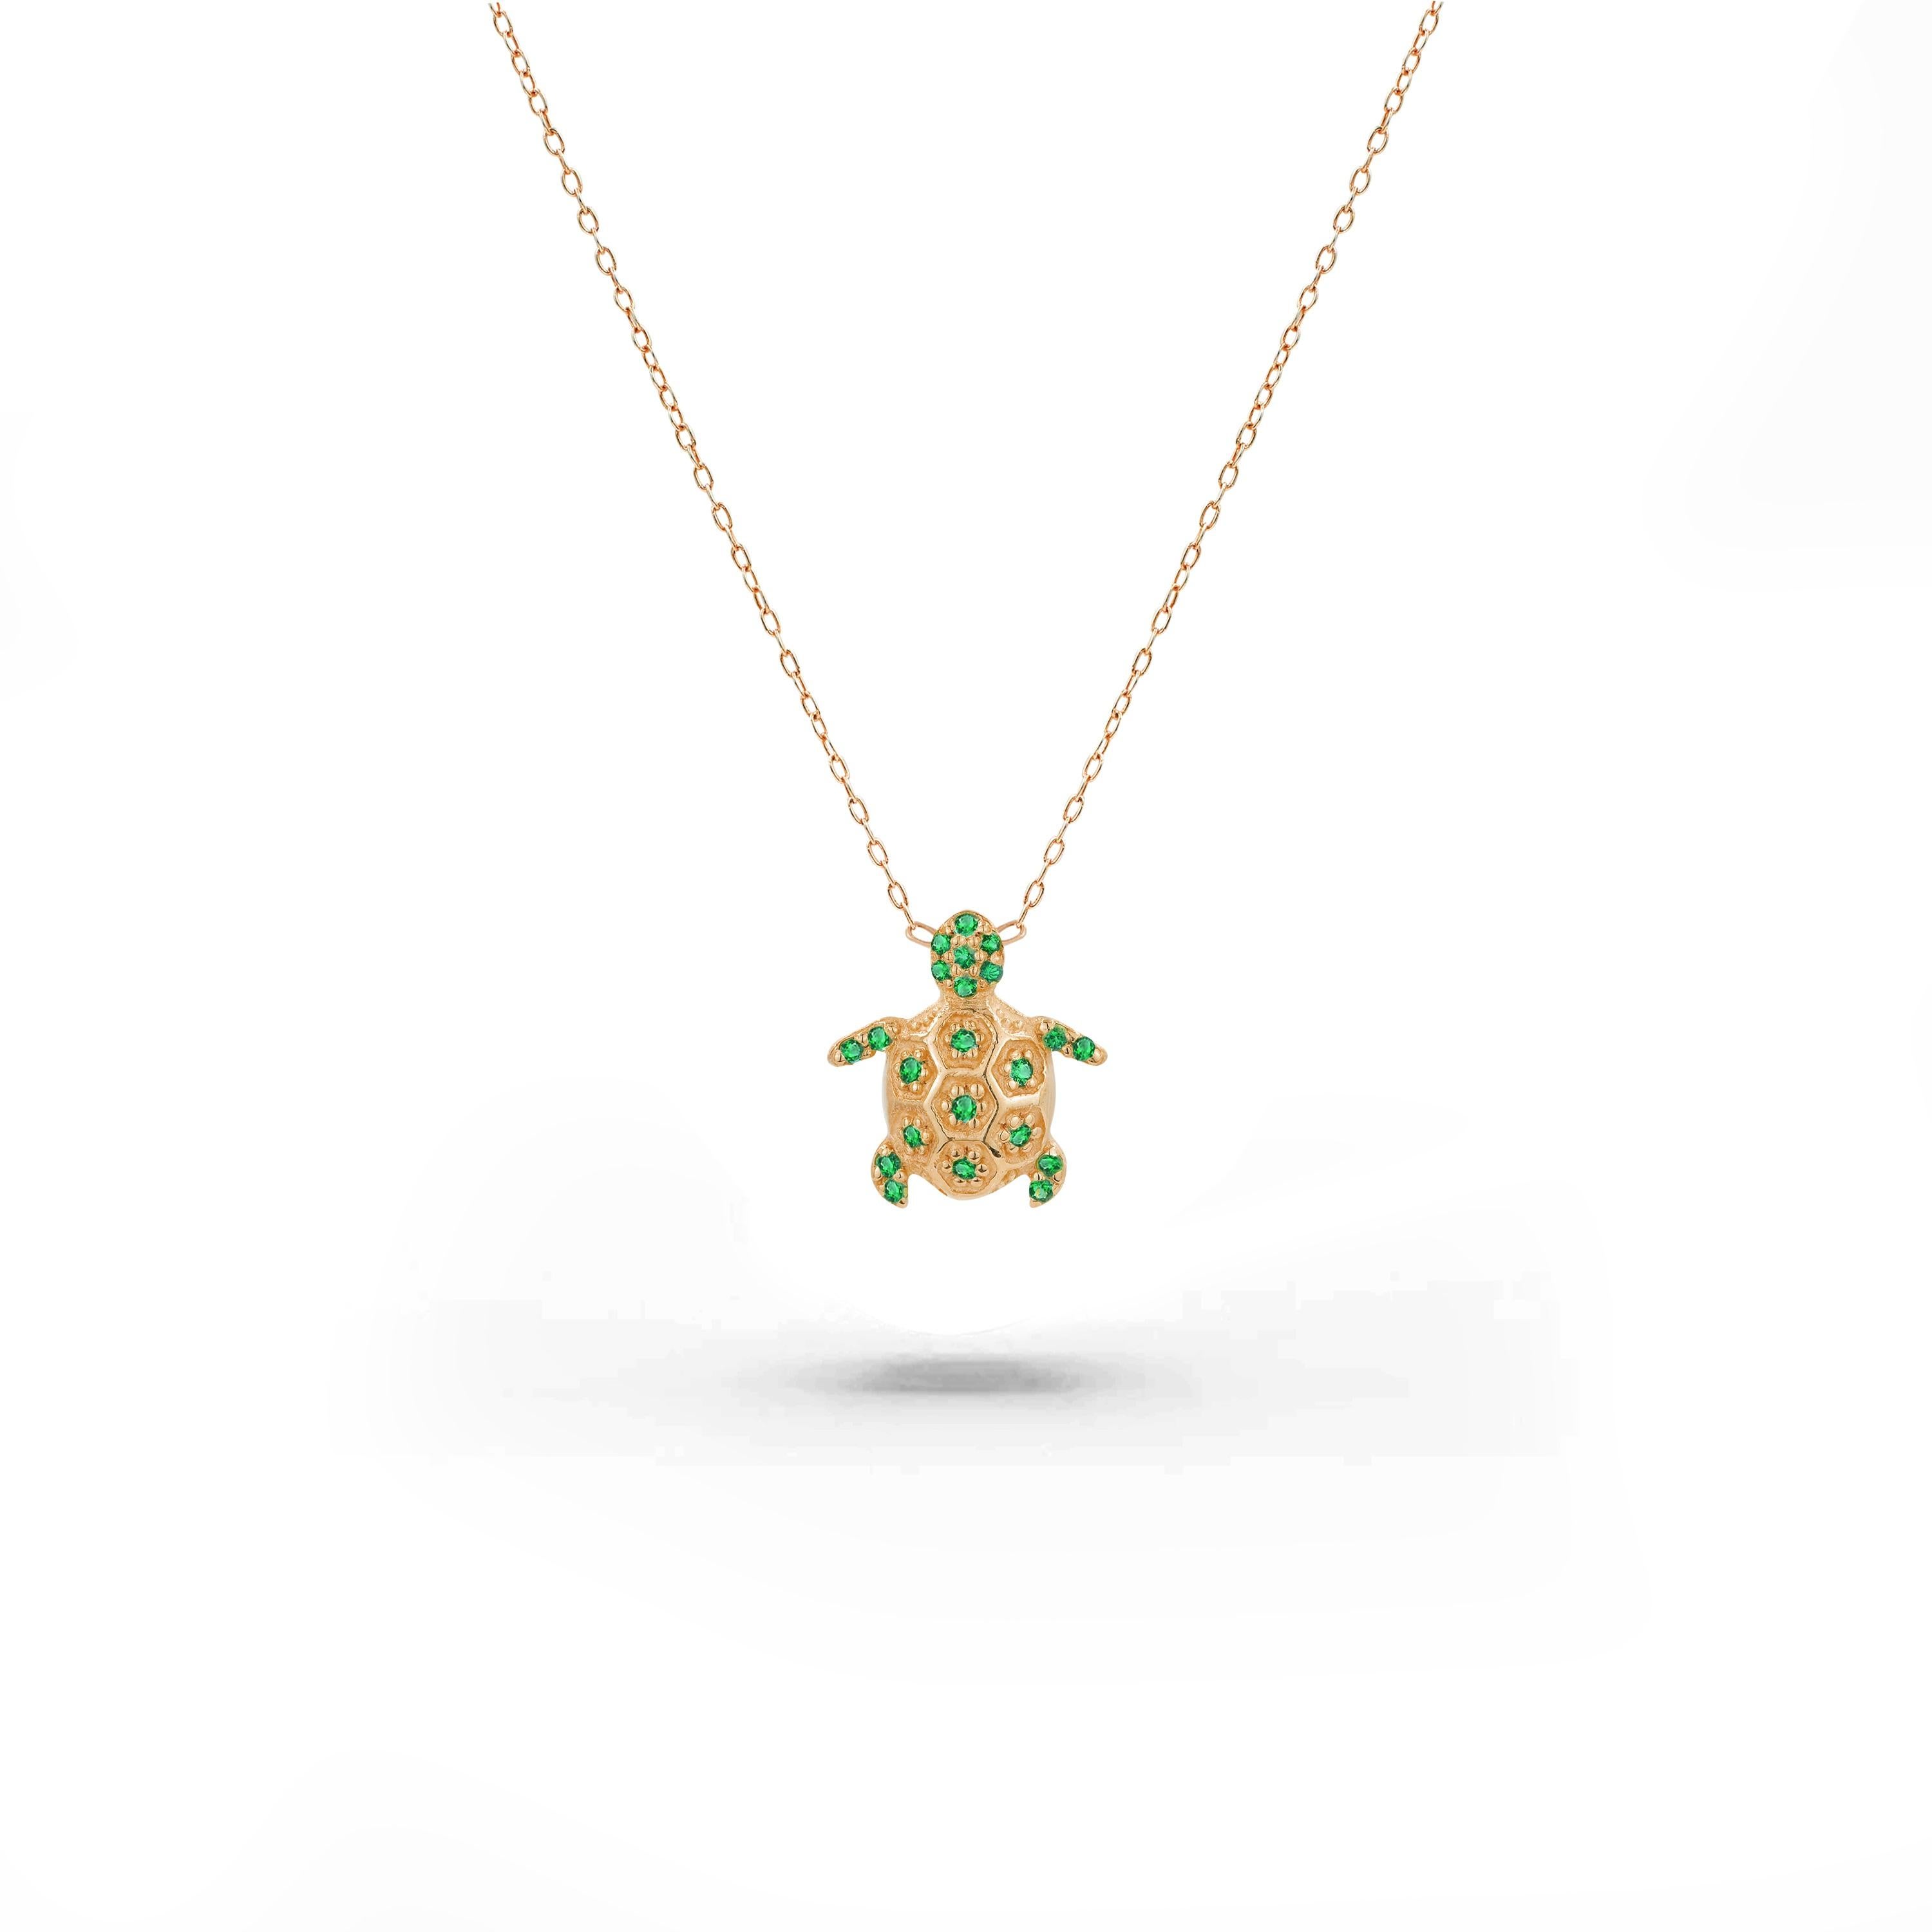 Emerald Turtle Necklace is made of 14k solid gold available in three colors, White Gold / Rose Gold / Yellow Gold.

Beautiful little minimalist necklace is adorned with natural AAA quality Emerald. Perfect for wearing by itself for a minimal